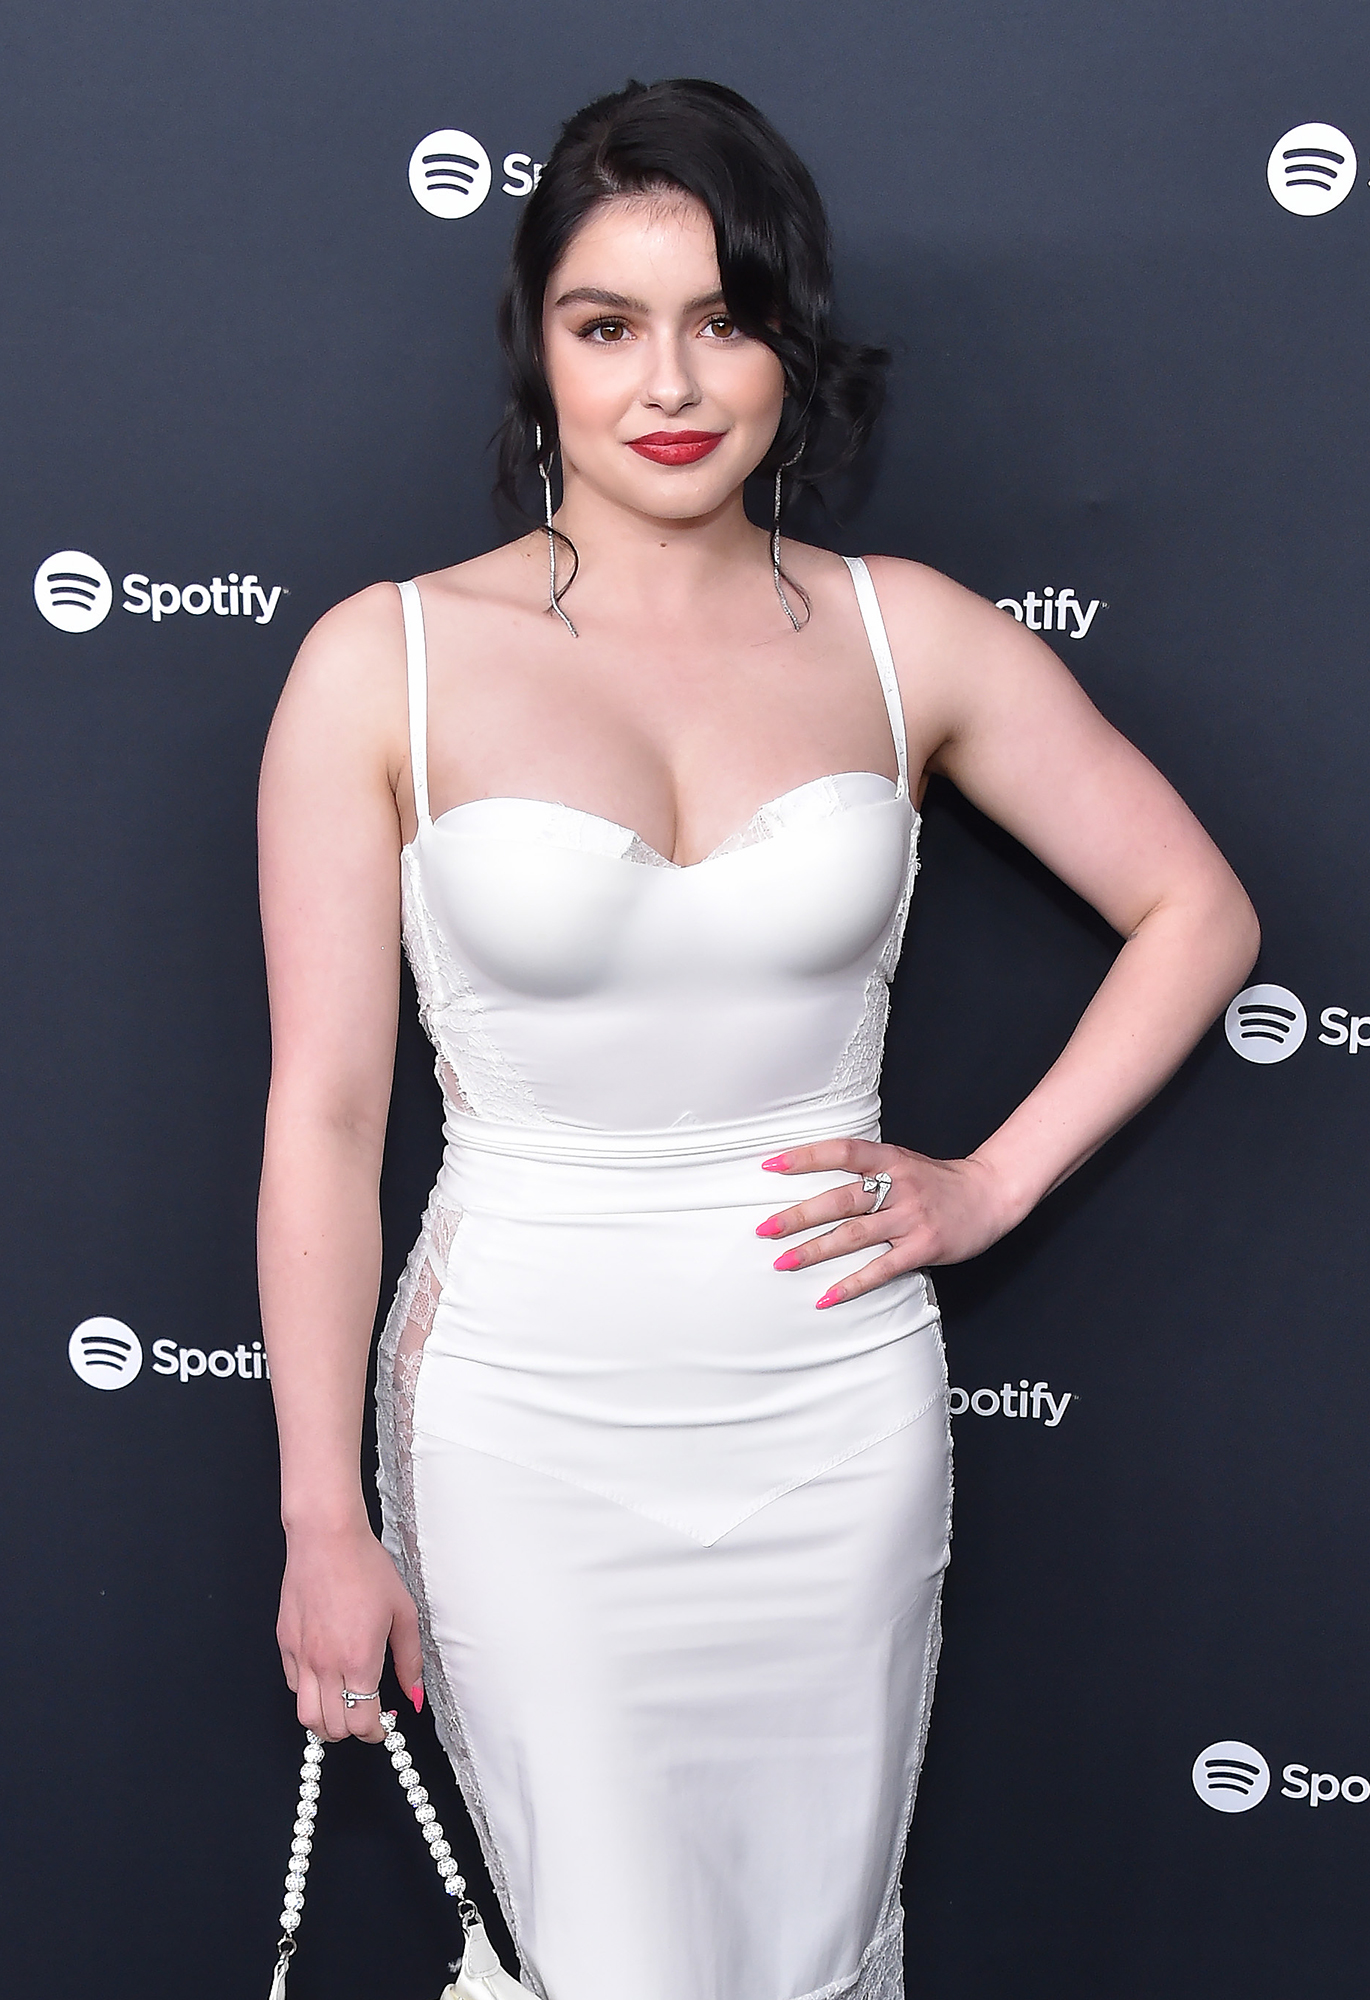 Ariel Winter Porn 2015 - Ariel Winter Through the Years: 'Modern Family' and More